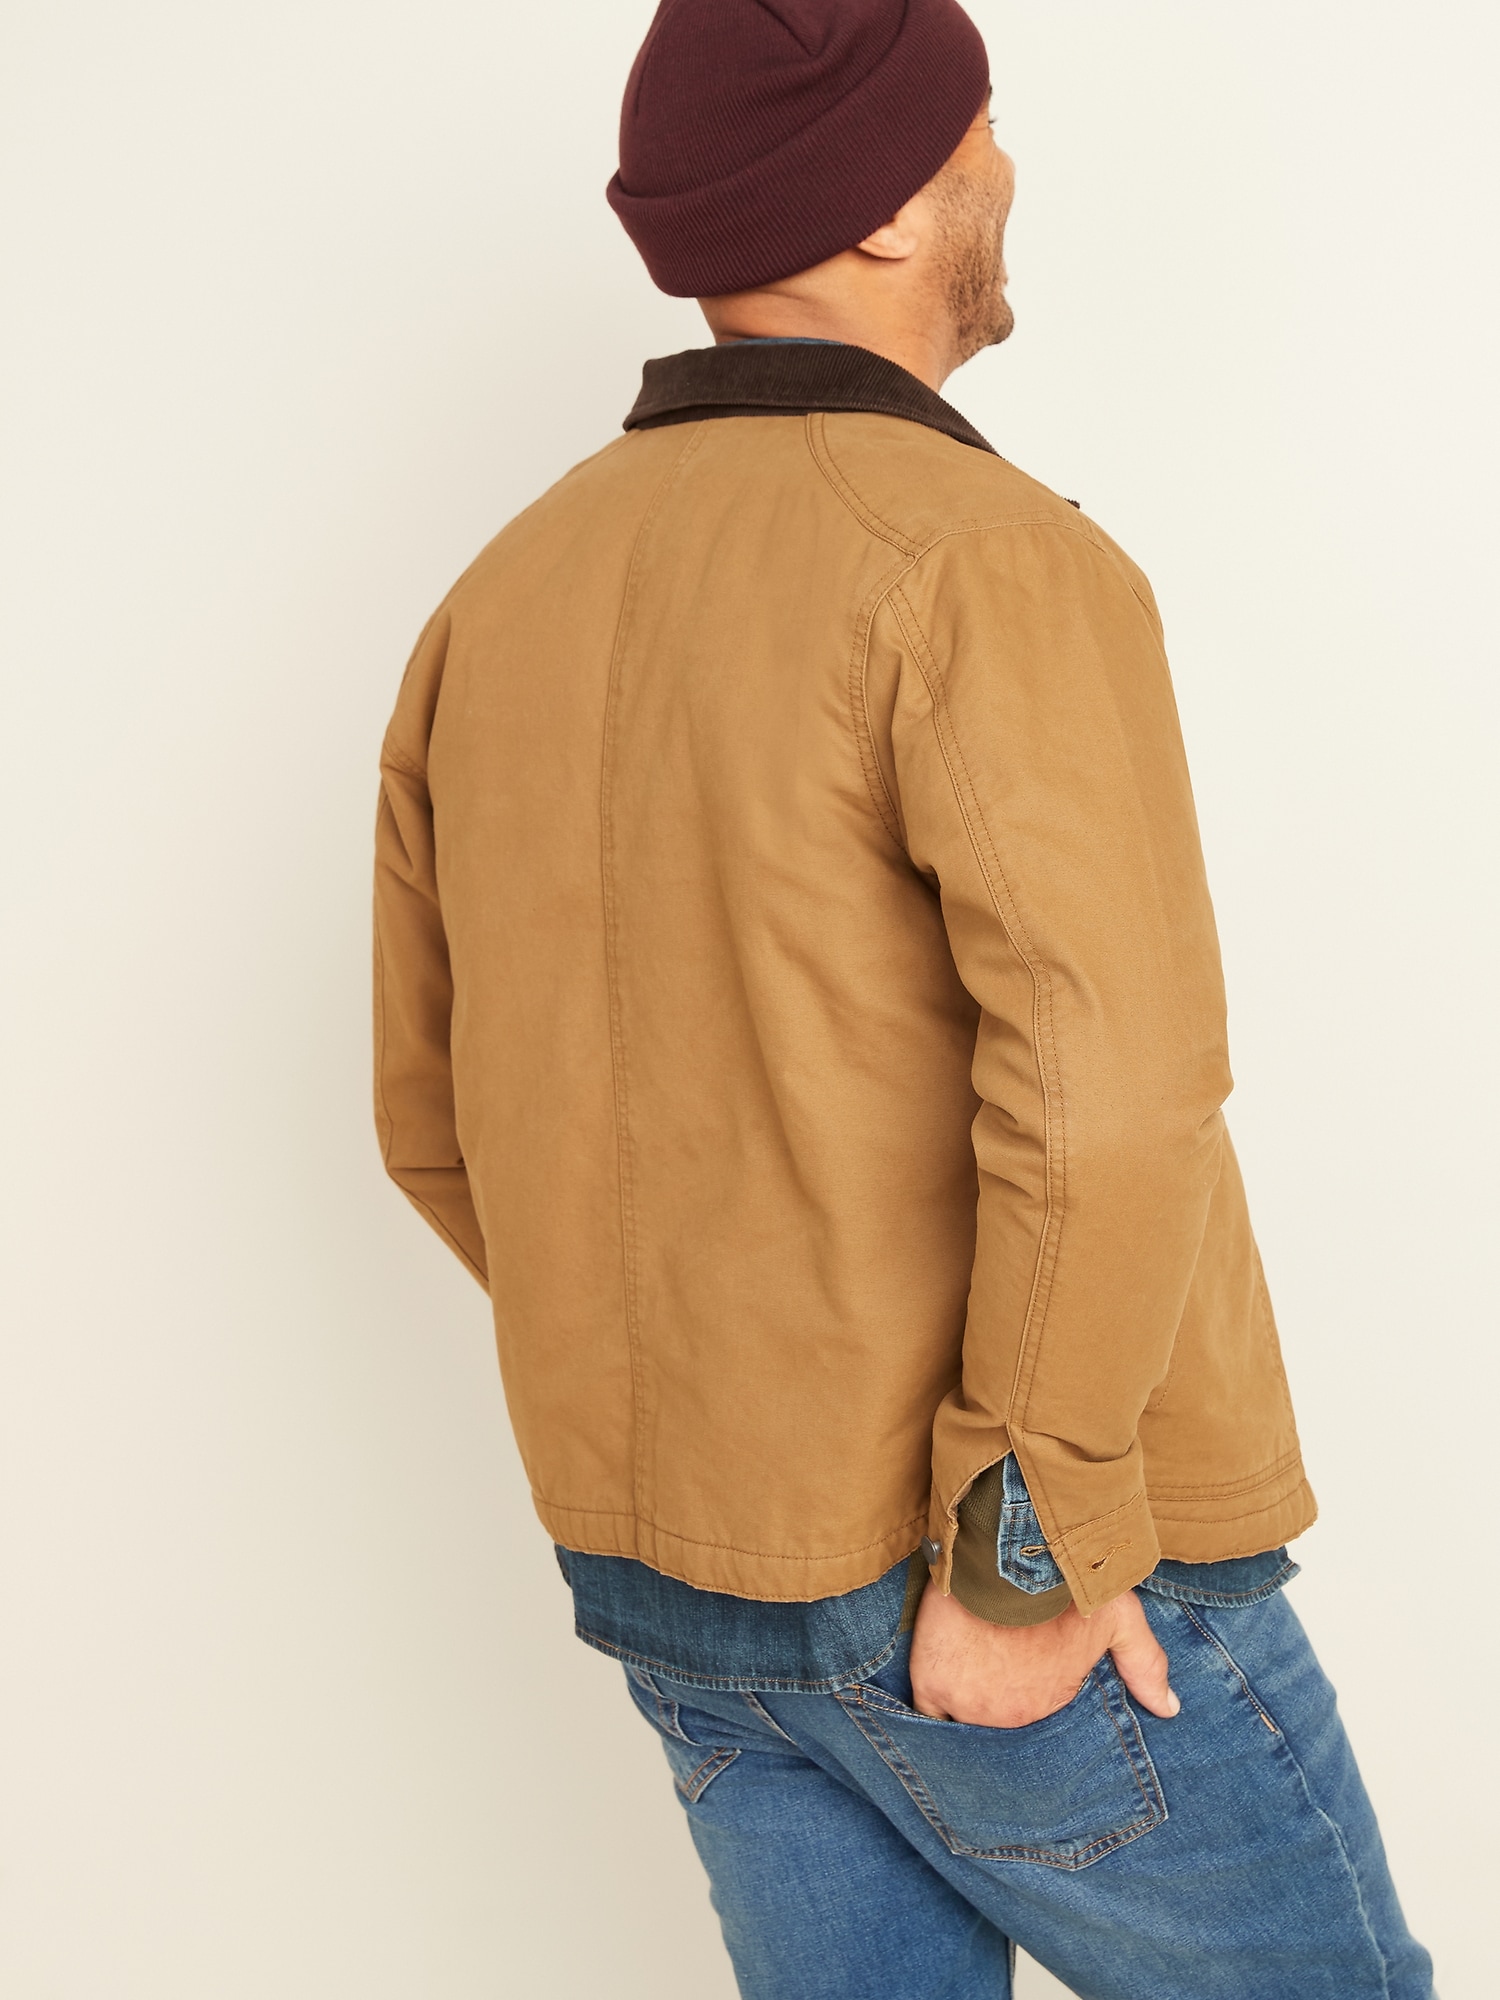 Vintage Canvas Jacket For Men Hip Hop Style, Classic Style With Lapel Neck,  Woolen Fabric, And Designer Clothing Style From Gold_medal_store006, $38.99